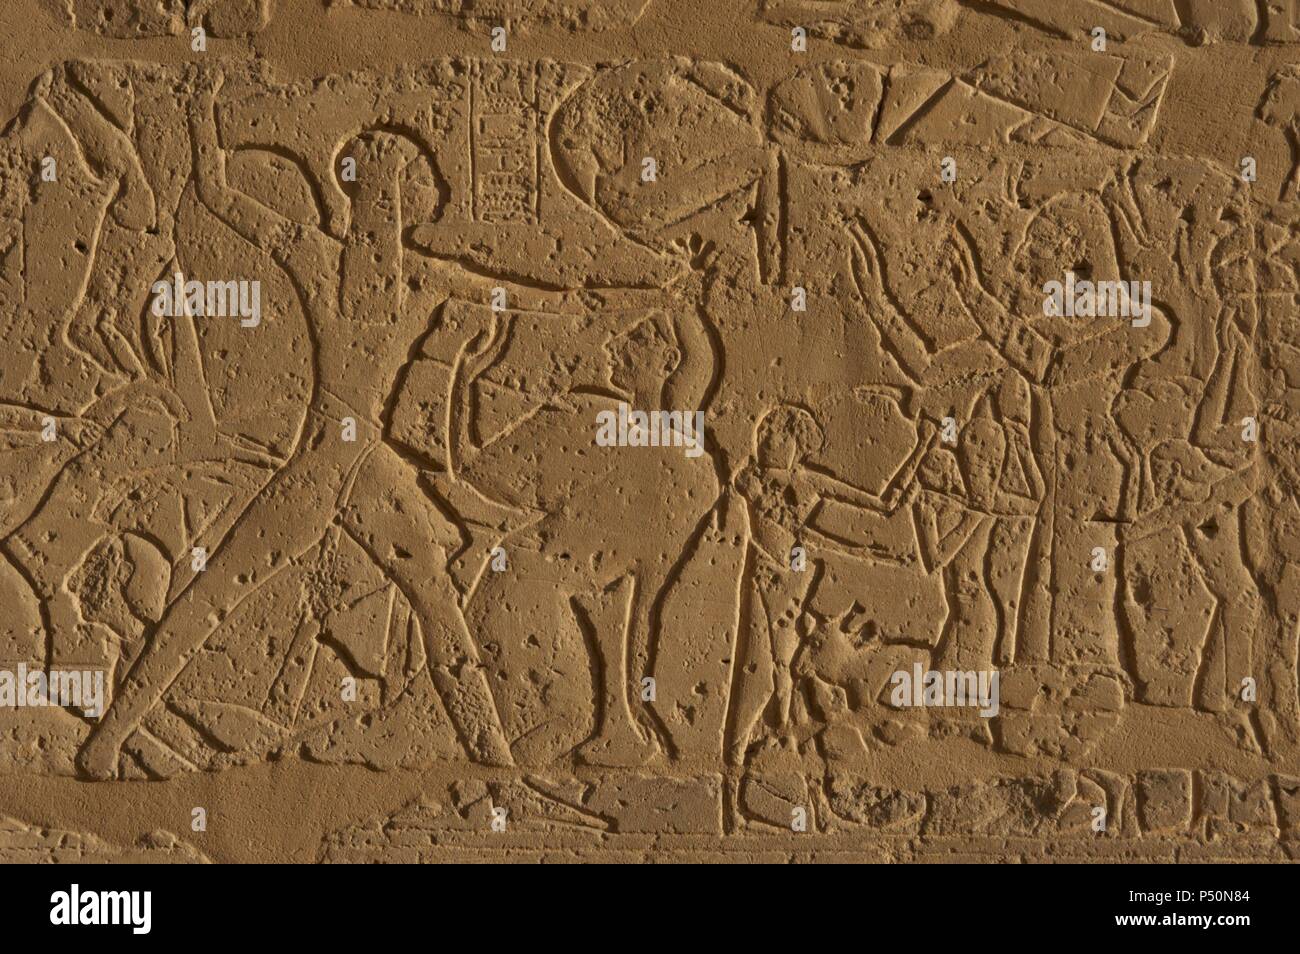 The Siege of Dapur (1269 B.C.). Syrian prisoners by Egyptian princes. 13th century B.C. Nineteenth Dynasty. New Kingdom. Relief. Ramesseum. Necropolis of Thebes. Valley of the Kings. Egypt. Stock Photo